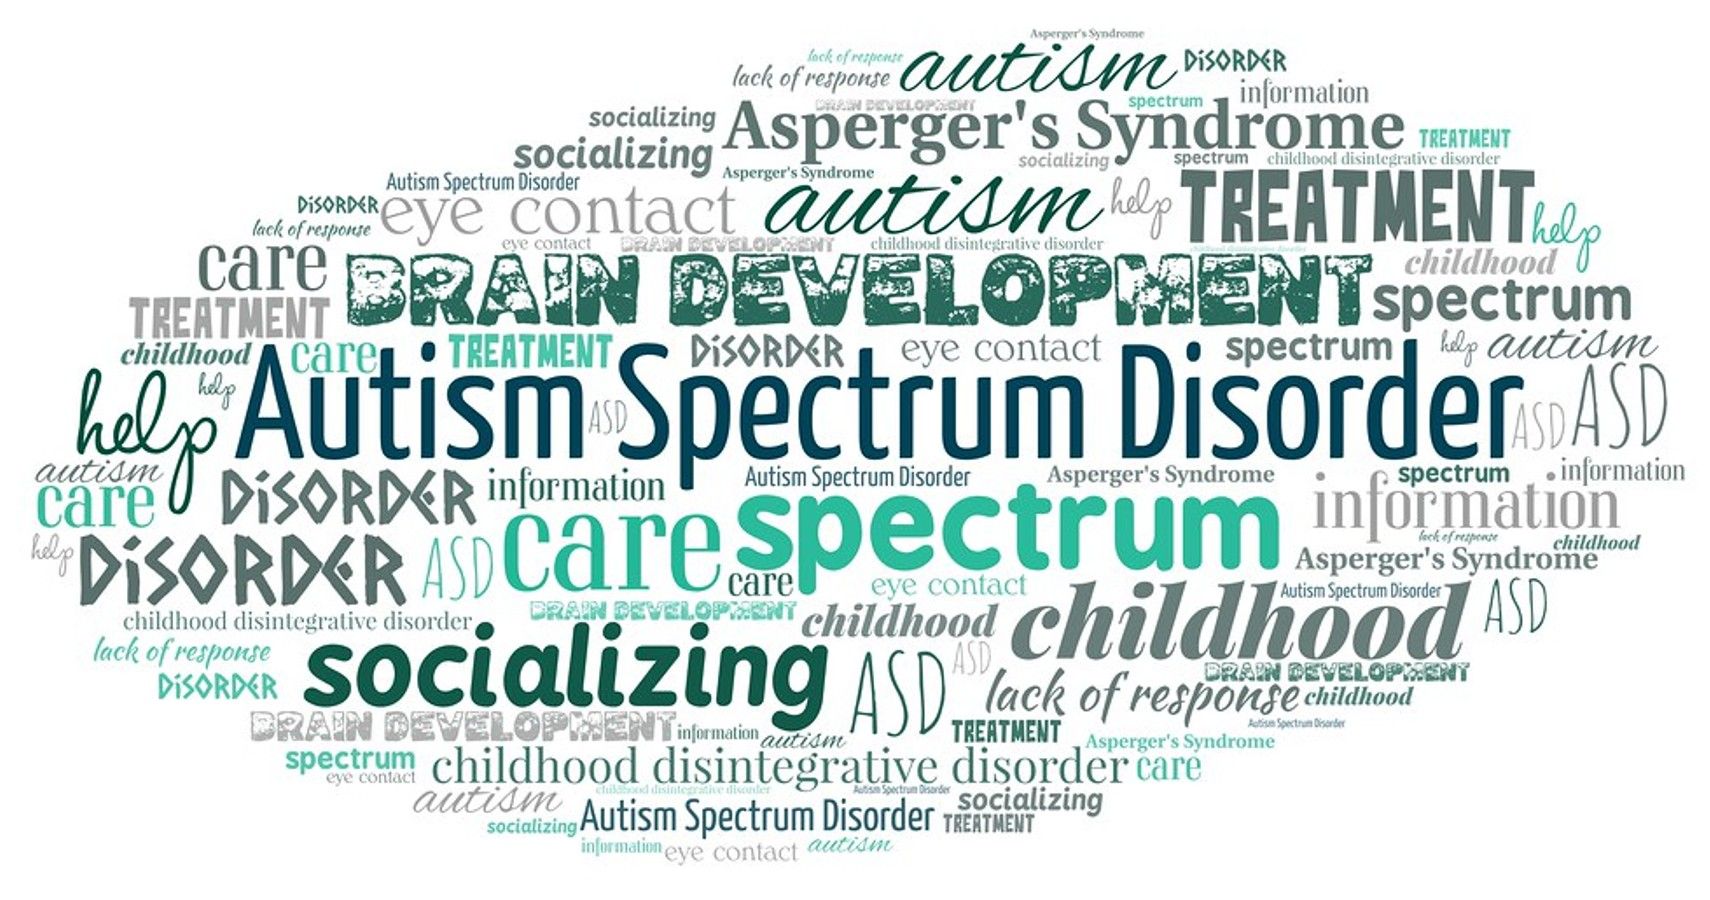 Early Intervention In Infancy Reduces Childhood Autism By Two-Thirds (1)